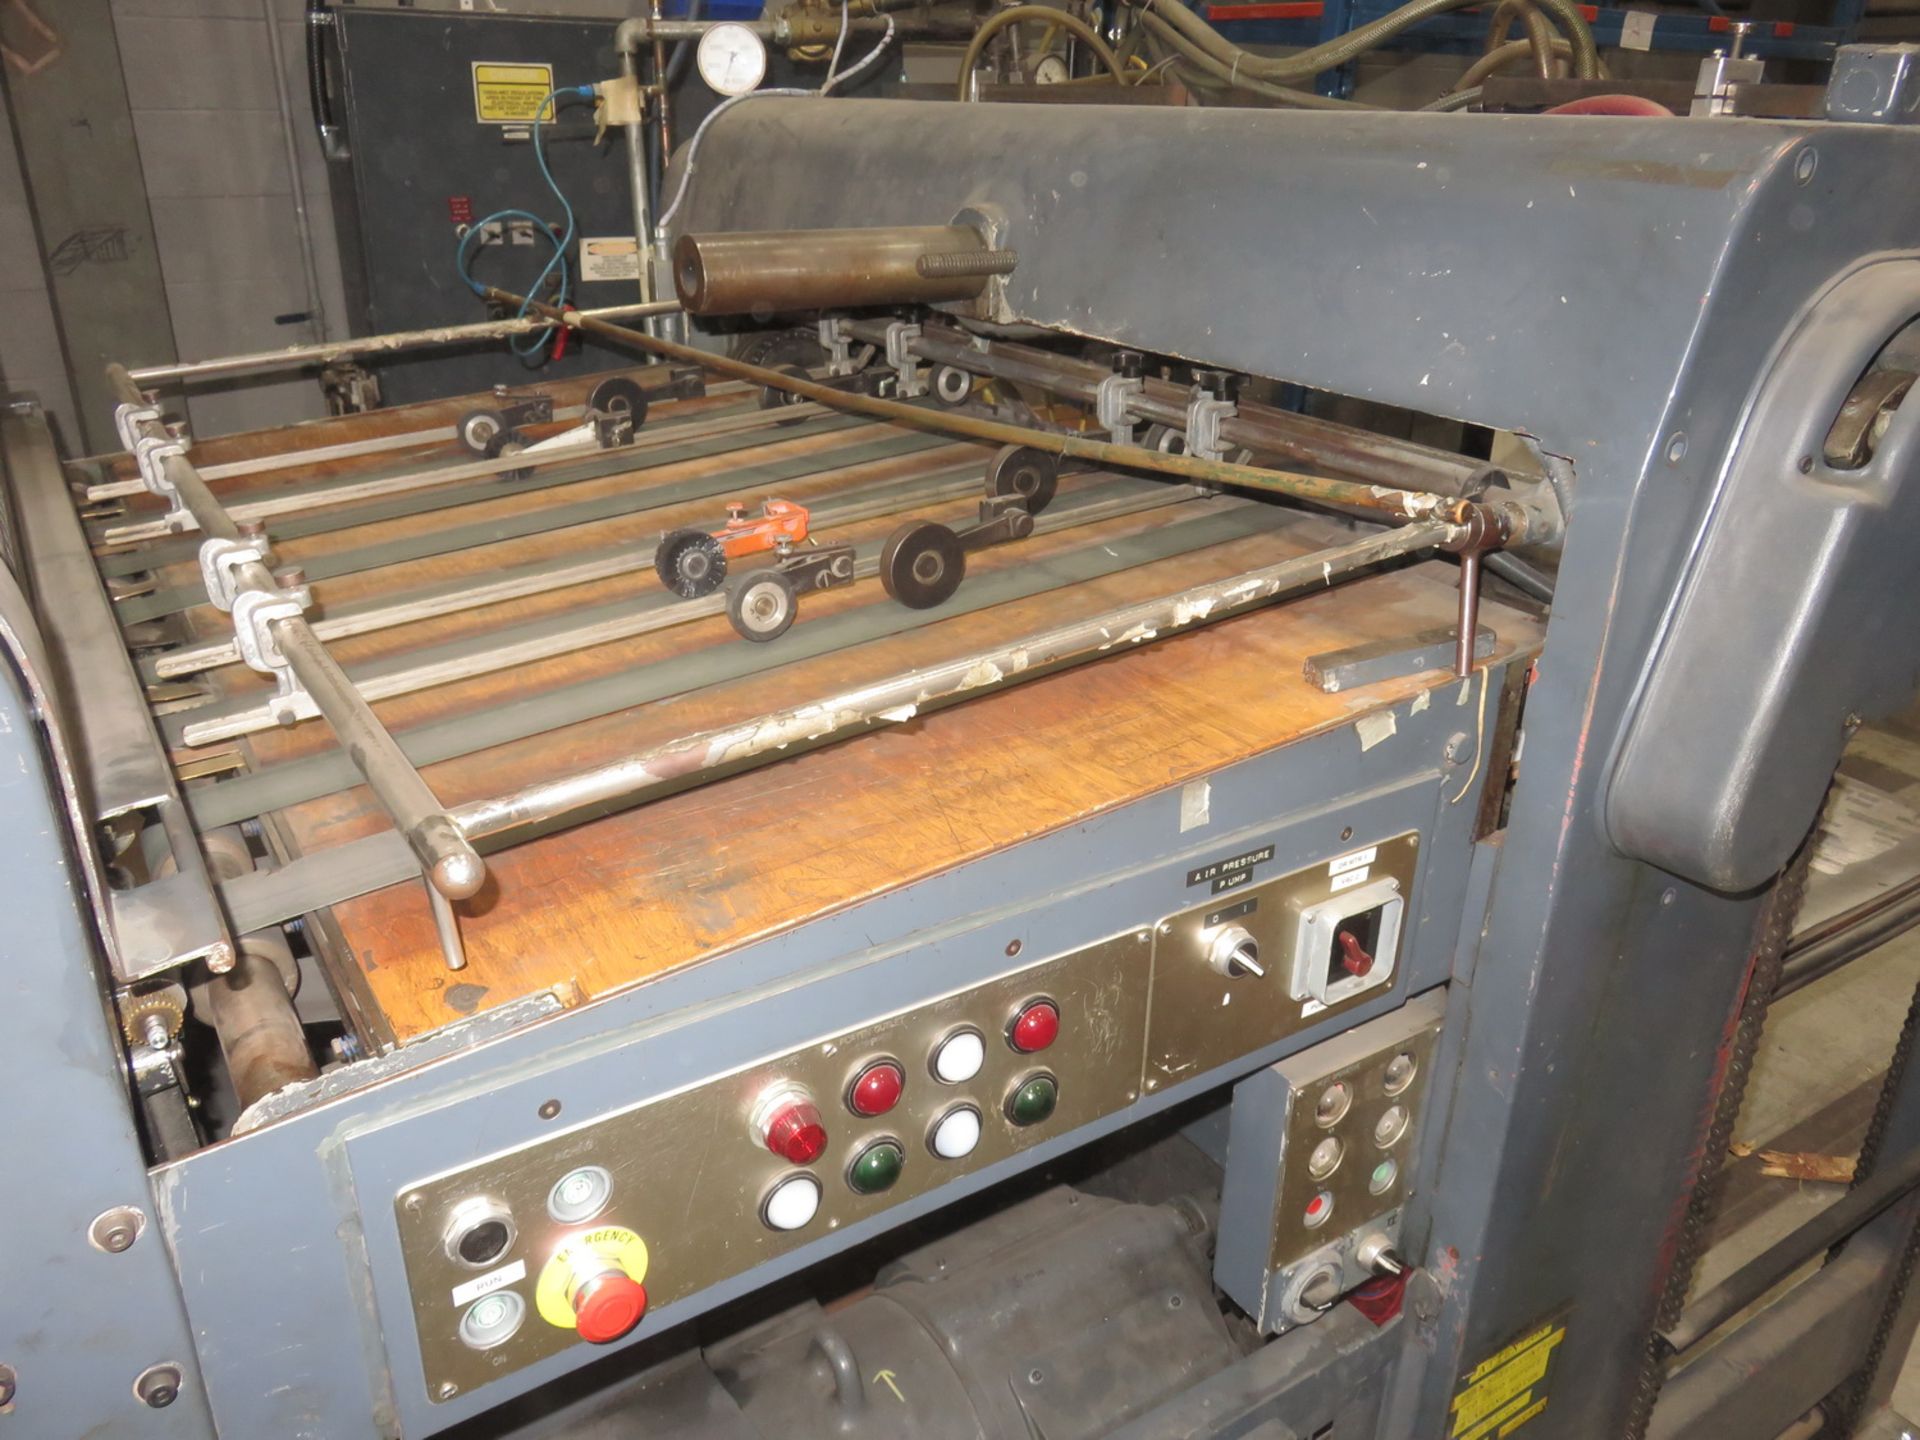 BOBST AUTO PLATEN MOD 8P-1260-E, DIE CUTTER, MAX CUTTING FORCE 550 TON CAPACITY, 36.25 X 49.5" MAX - Image 7 of 8